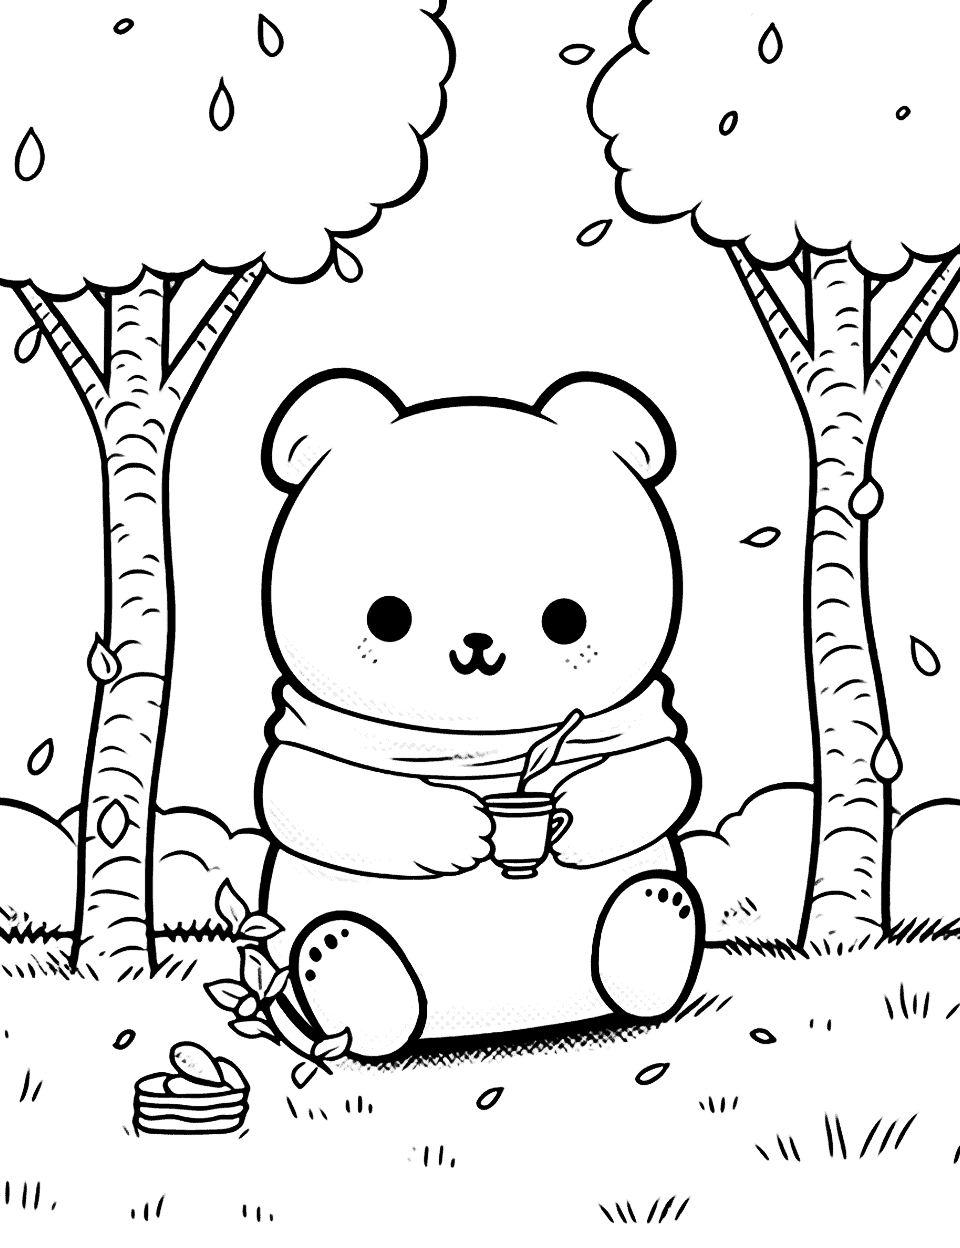 Panda's Perfect Picnic Kawaii Coloring Page - A Kawaii panda enjoying a perfect picnic under the shade of a large, leafy tree.